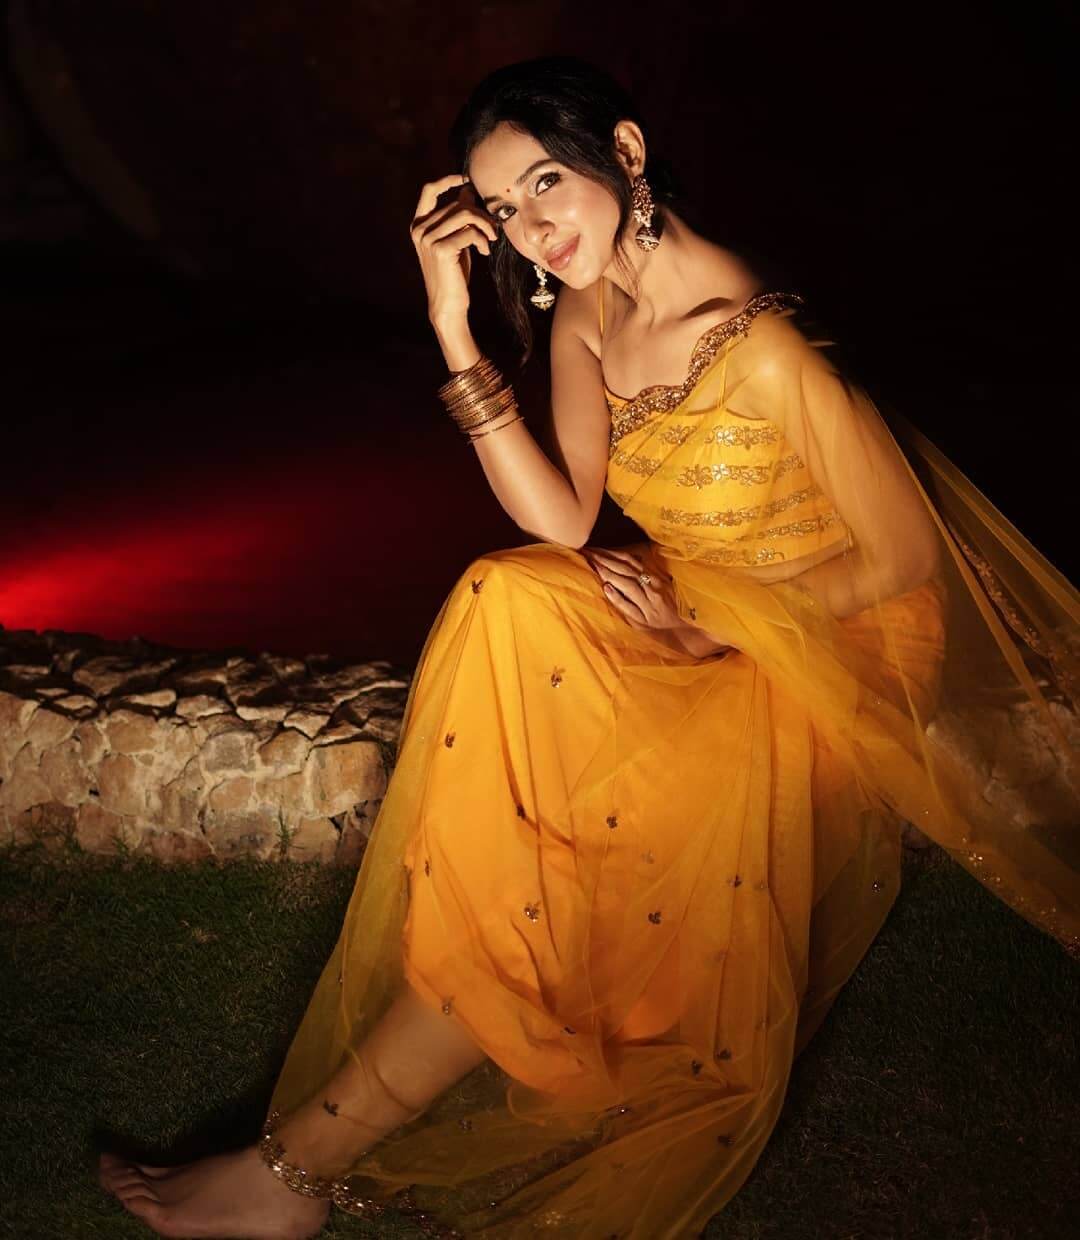 Riya Suman Red Carpet Look In Yellow Net Saree With Yellow Noddle Strap Blouse